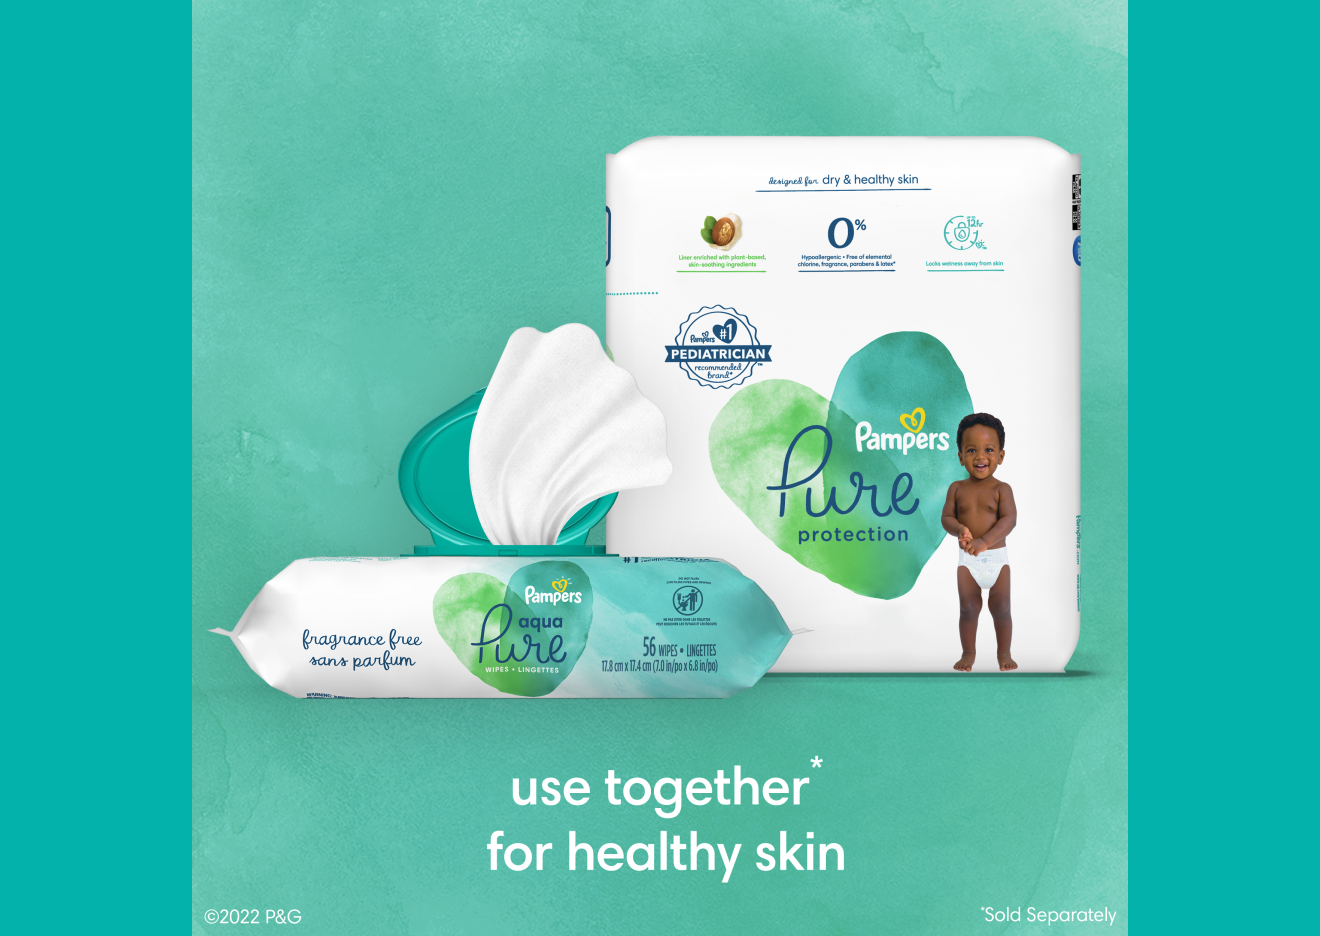 Pampers Pure Protection Art.P04H018 - Catalog / Care & Safety / Toileteries  /  - Kids online store